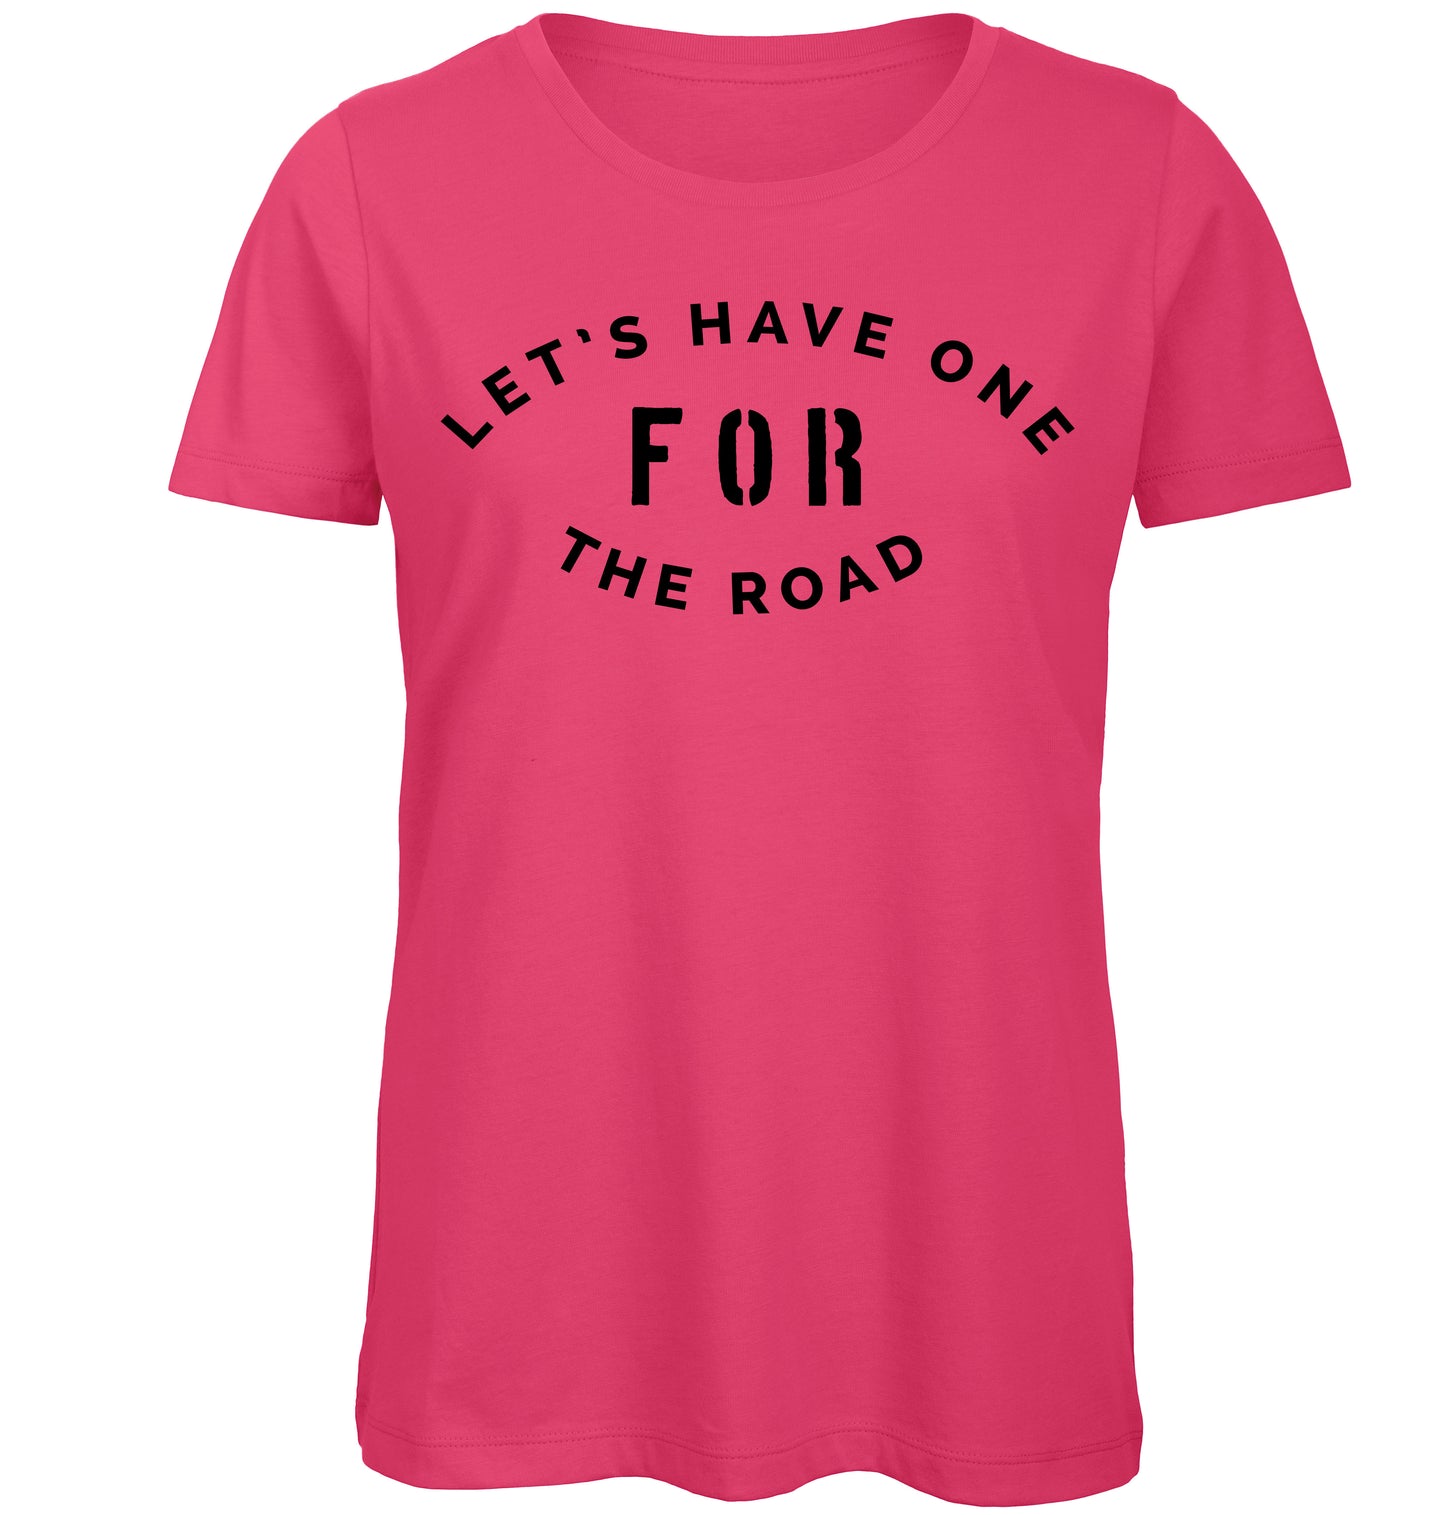 One for the road Ladies T-Shirt